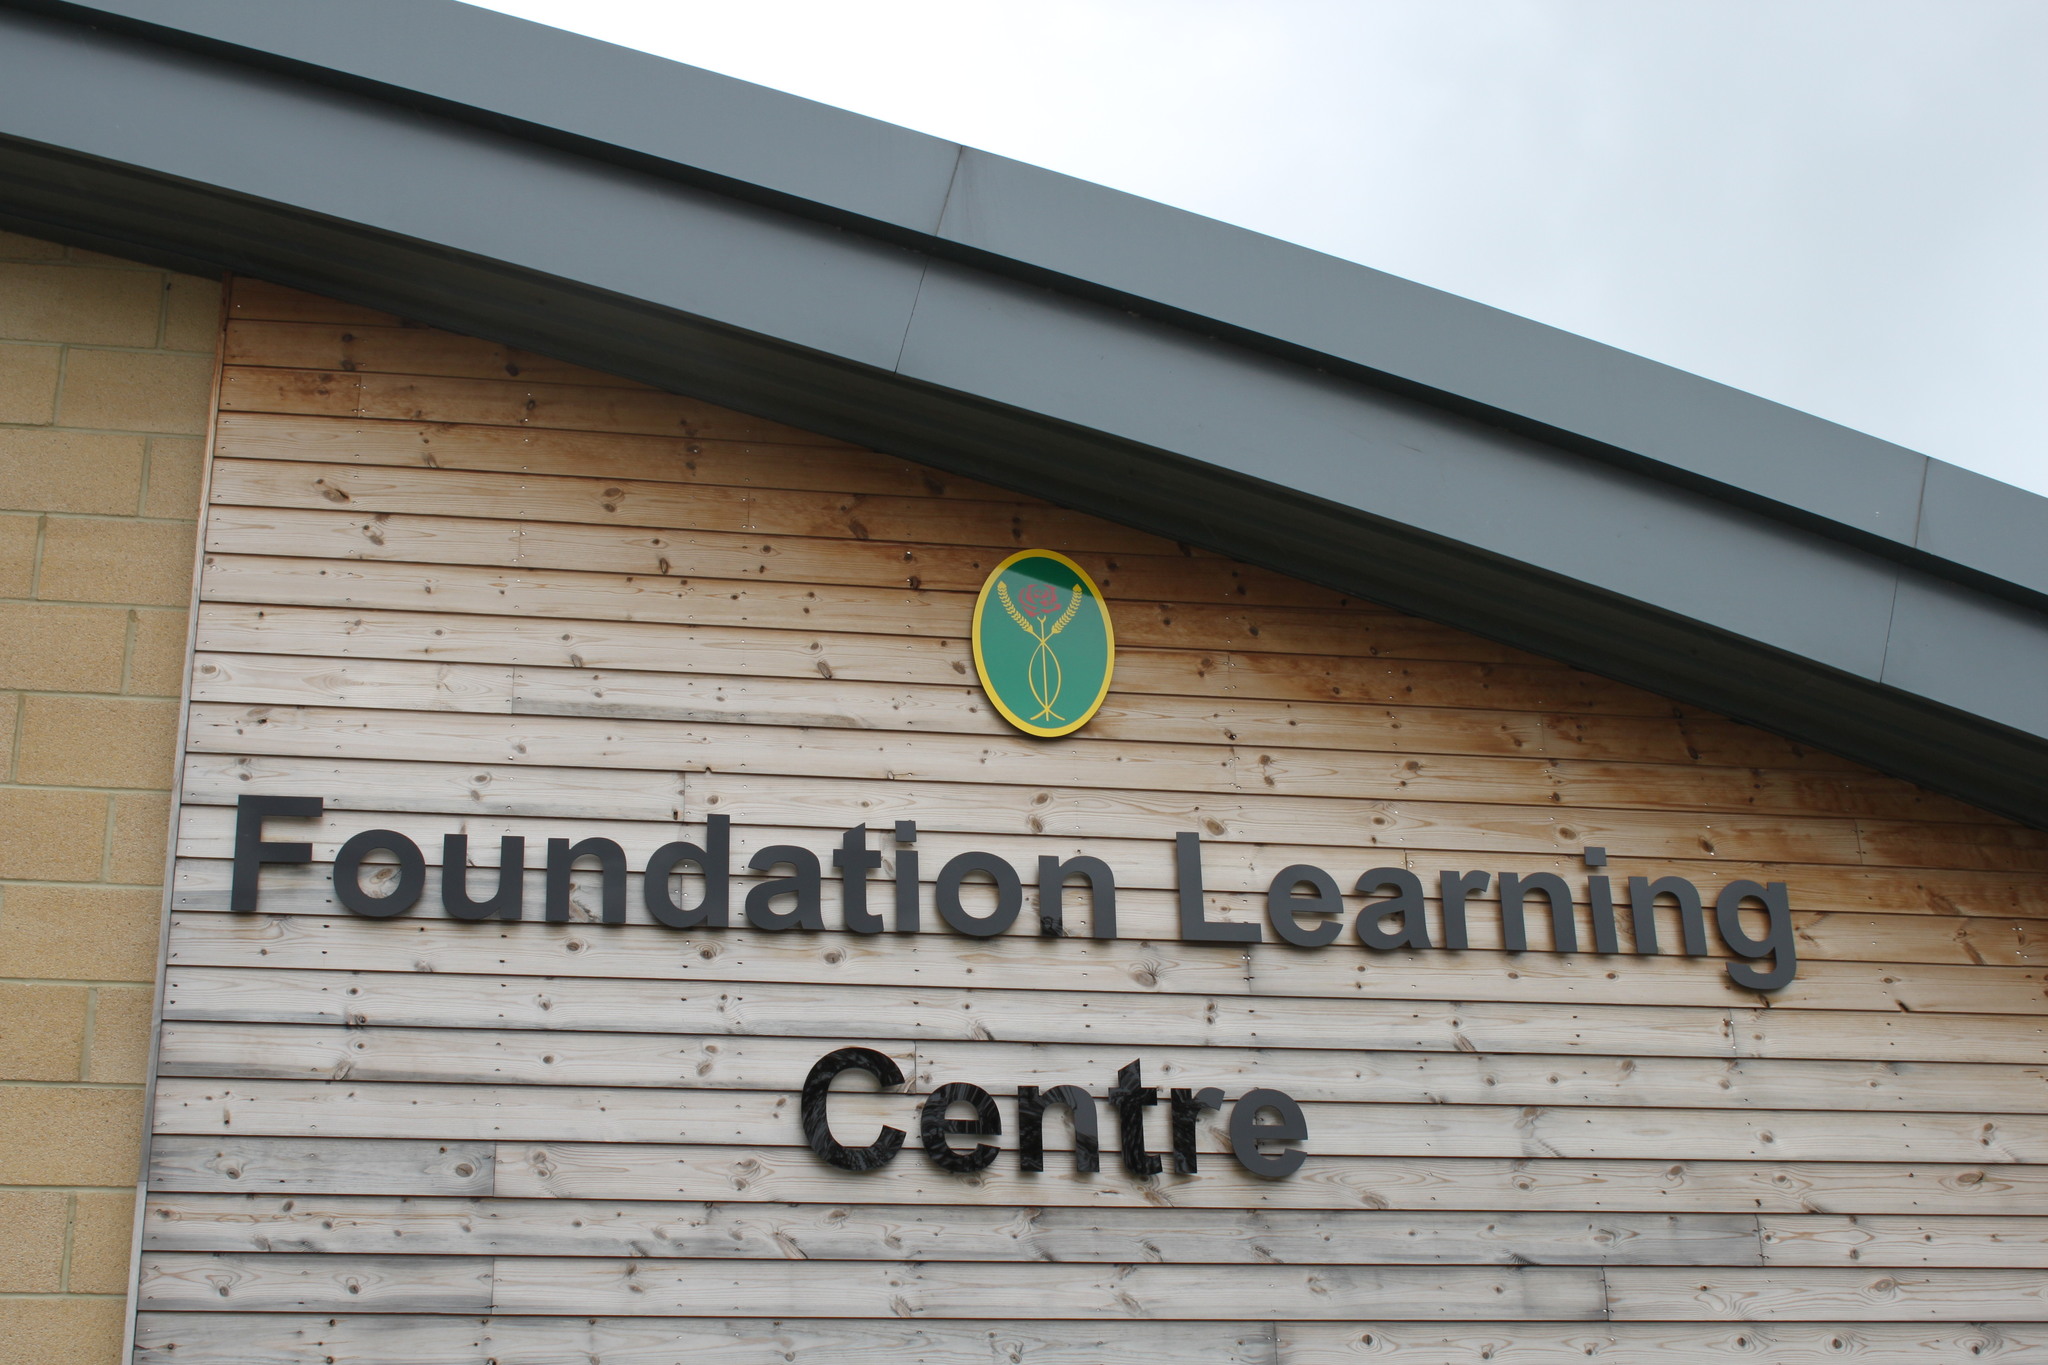 Myerscough College Foundation Learning